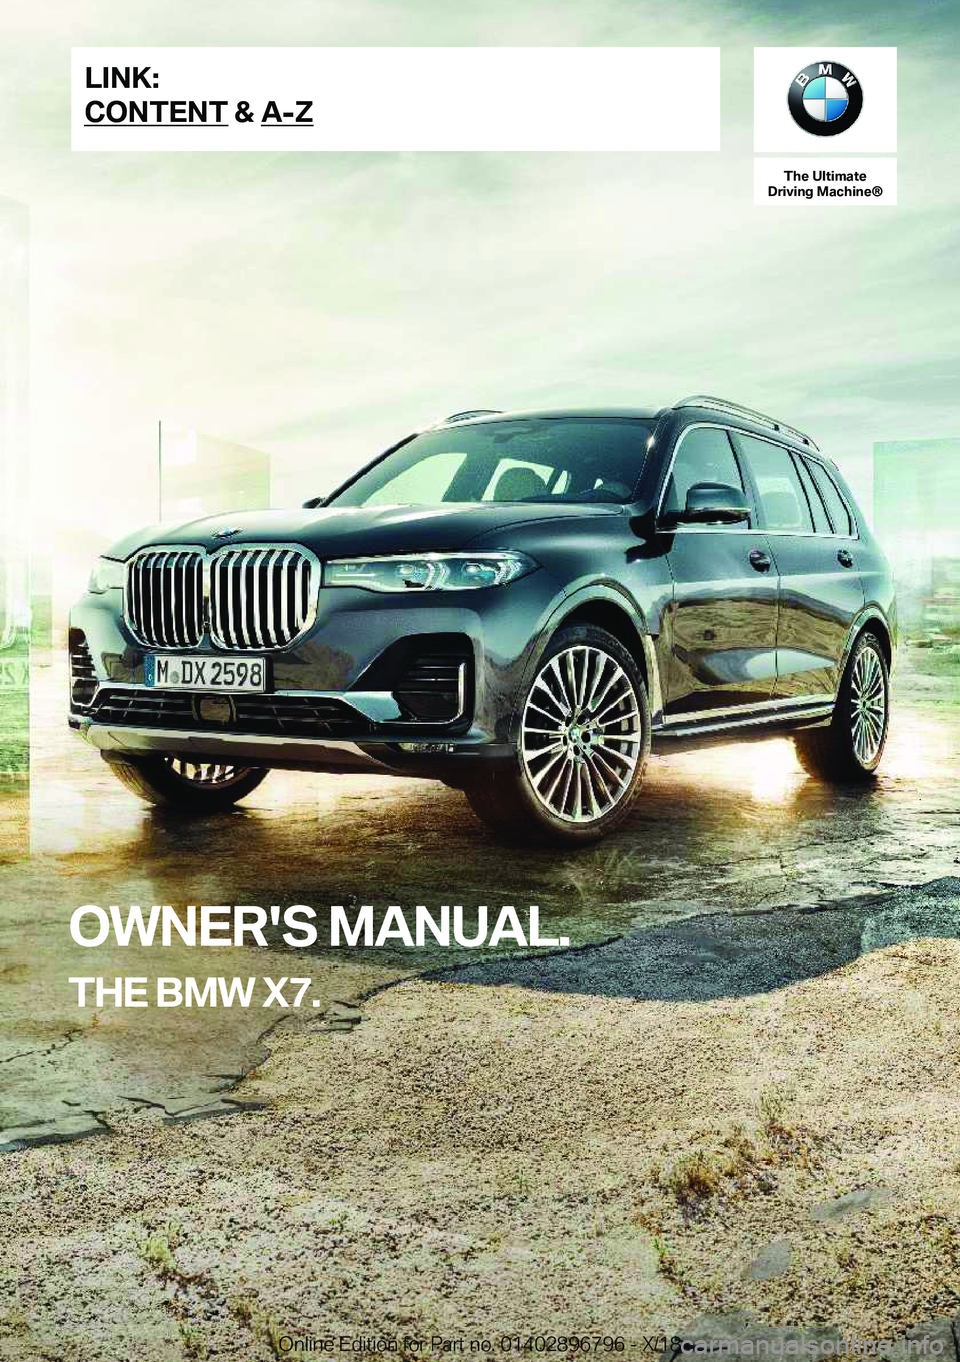 BMW X7 2019  Owners Manual �T�h�e��U�l�t�i�m�a�t�e
�D�r�i�v�i�n�g��M�a�c�h�i�n�e�n
�O�W�N�E�R�'�S��M�A�N�U�A�L�.
�T�H�E��B�M�W��X�7�.�L�I�N�K�:
�C�O�N�T�E�N�T��&��A�-�Z�O�n�l�i�n�e��E�d�i�t�i�o�n��f�o�r��P�a�r�t�